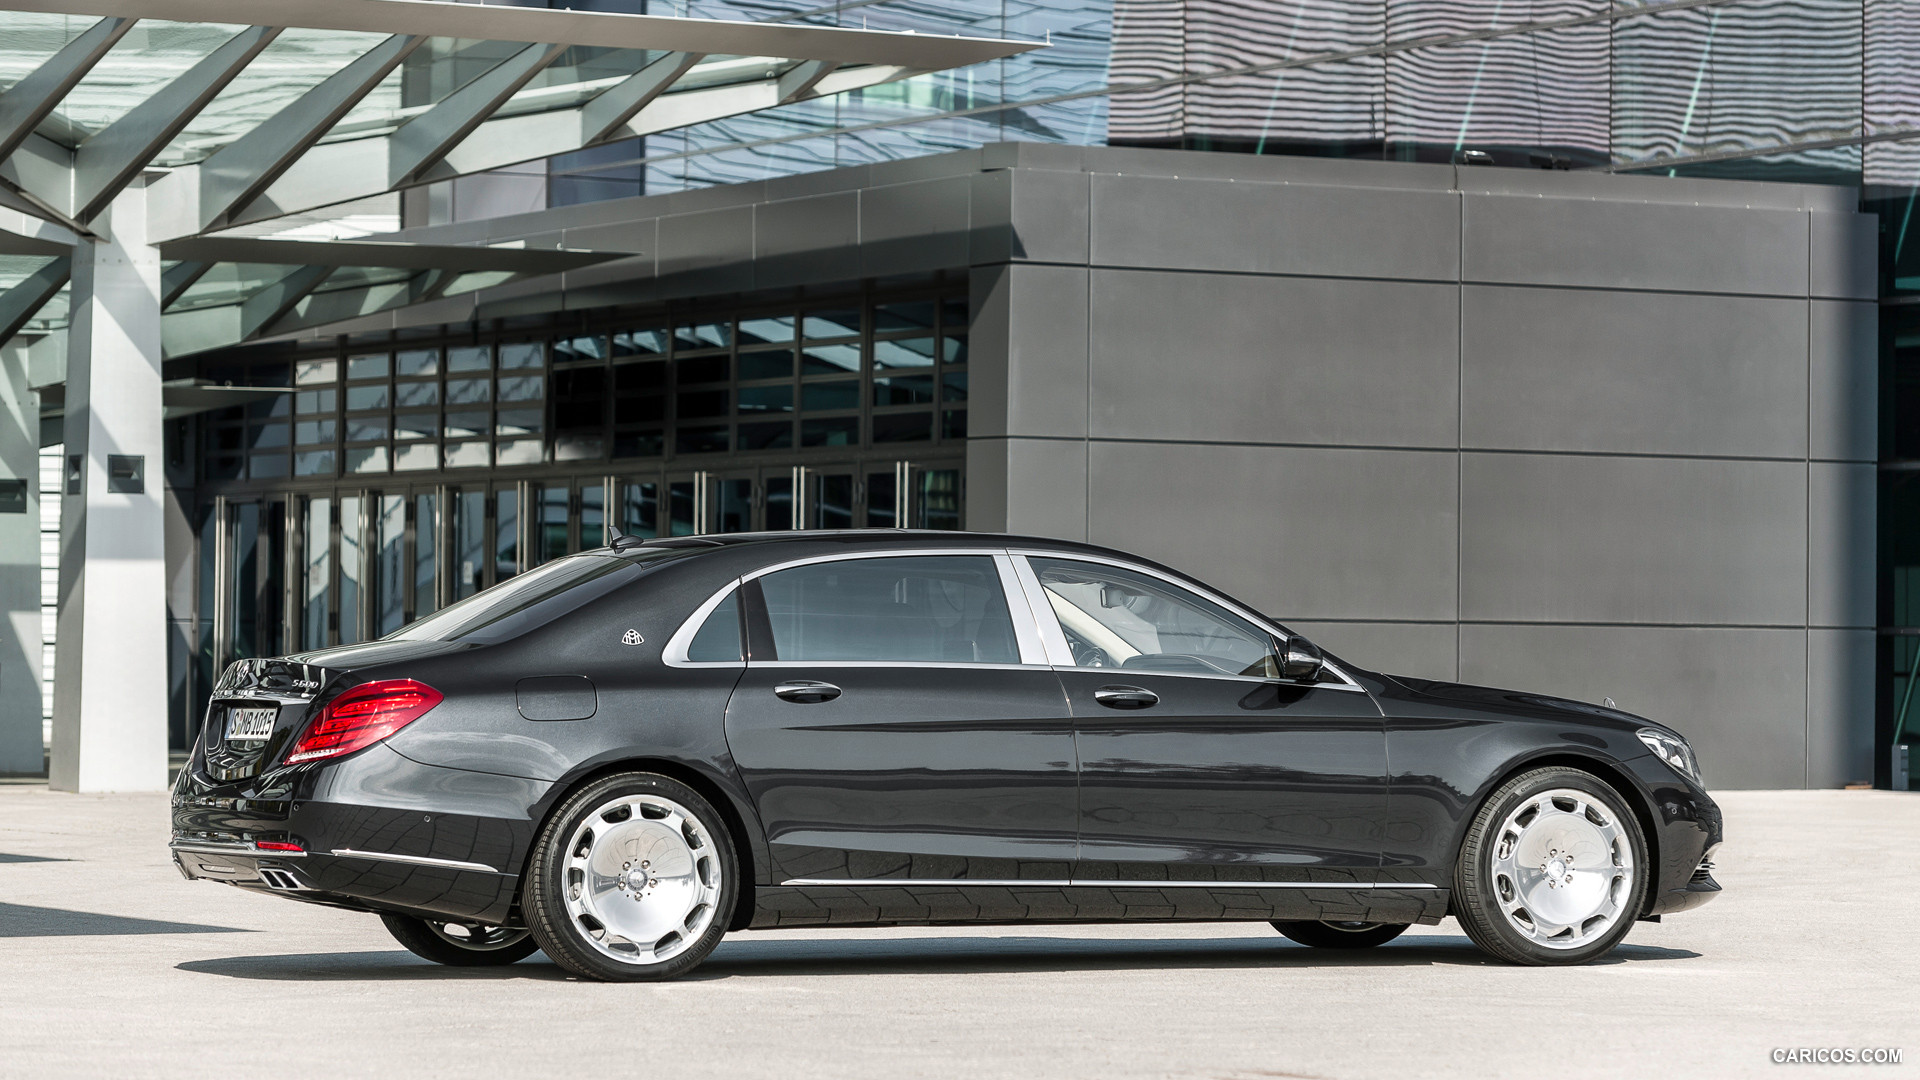 2016 Mercedes-Maybach S-Class S600 - Side, #12 of 225